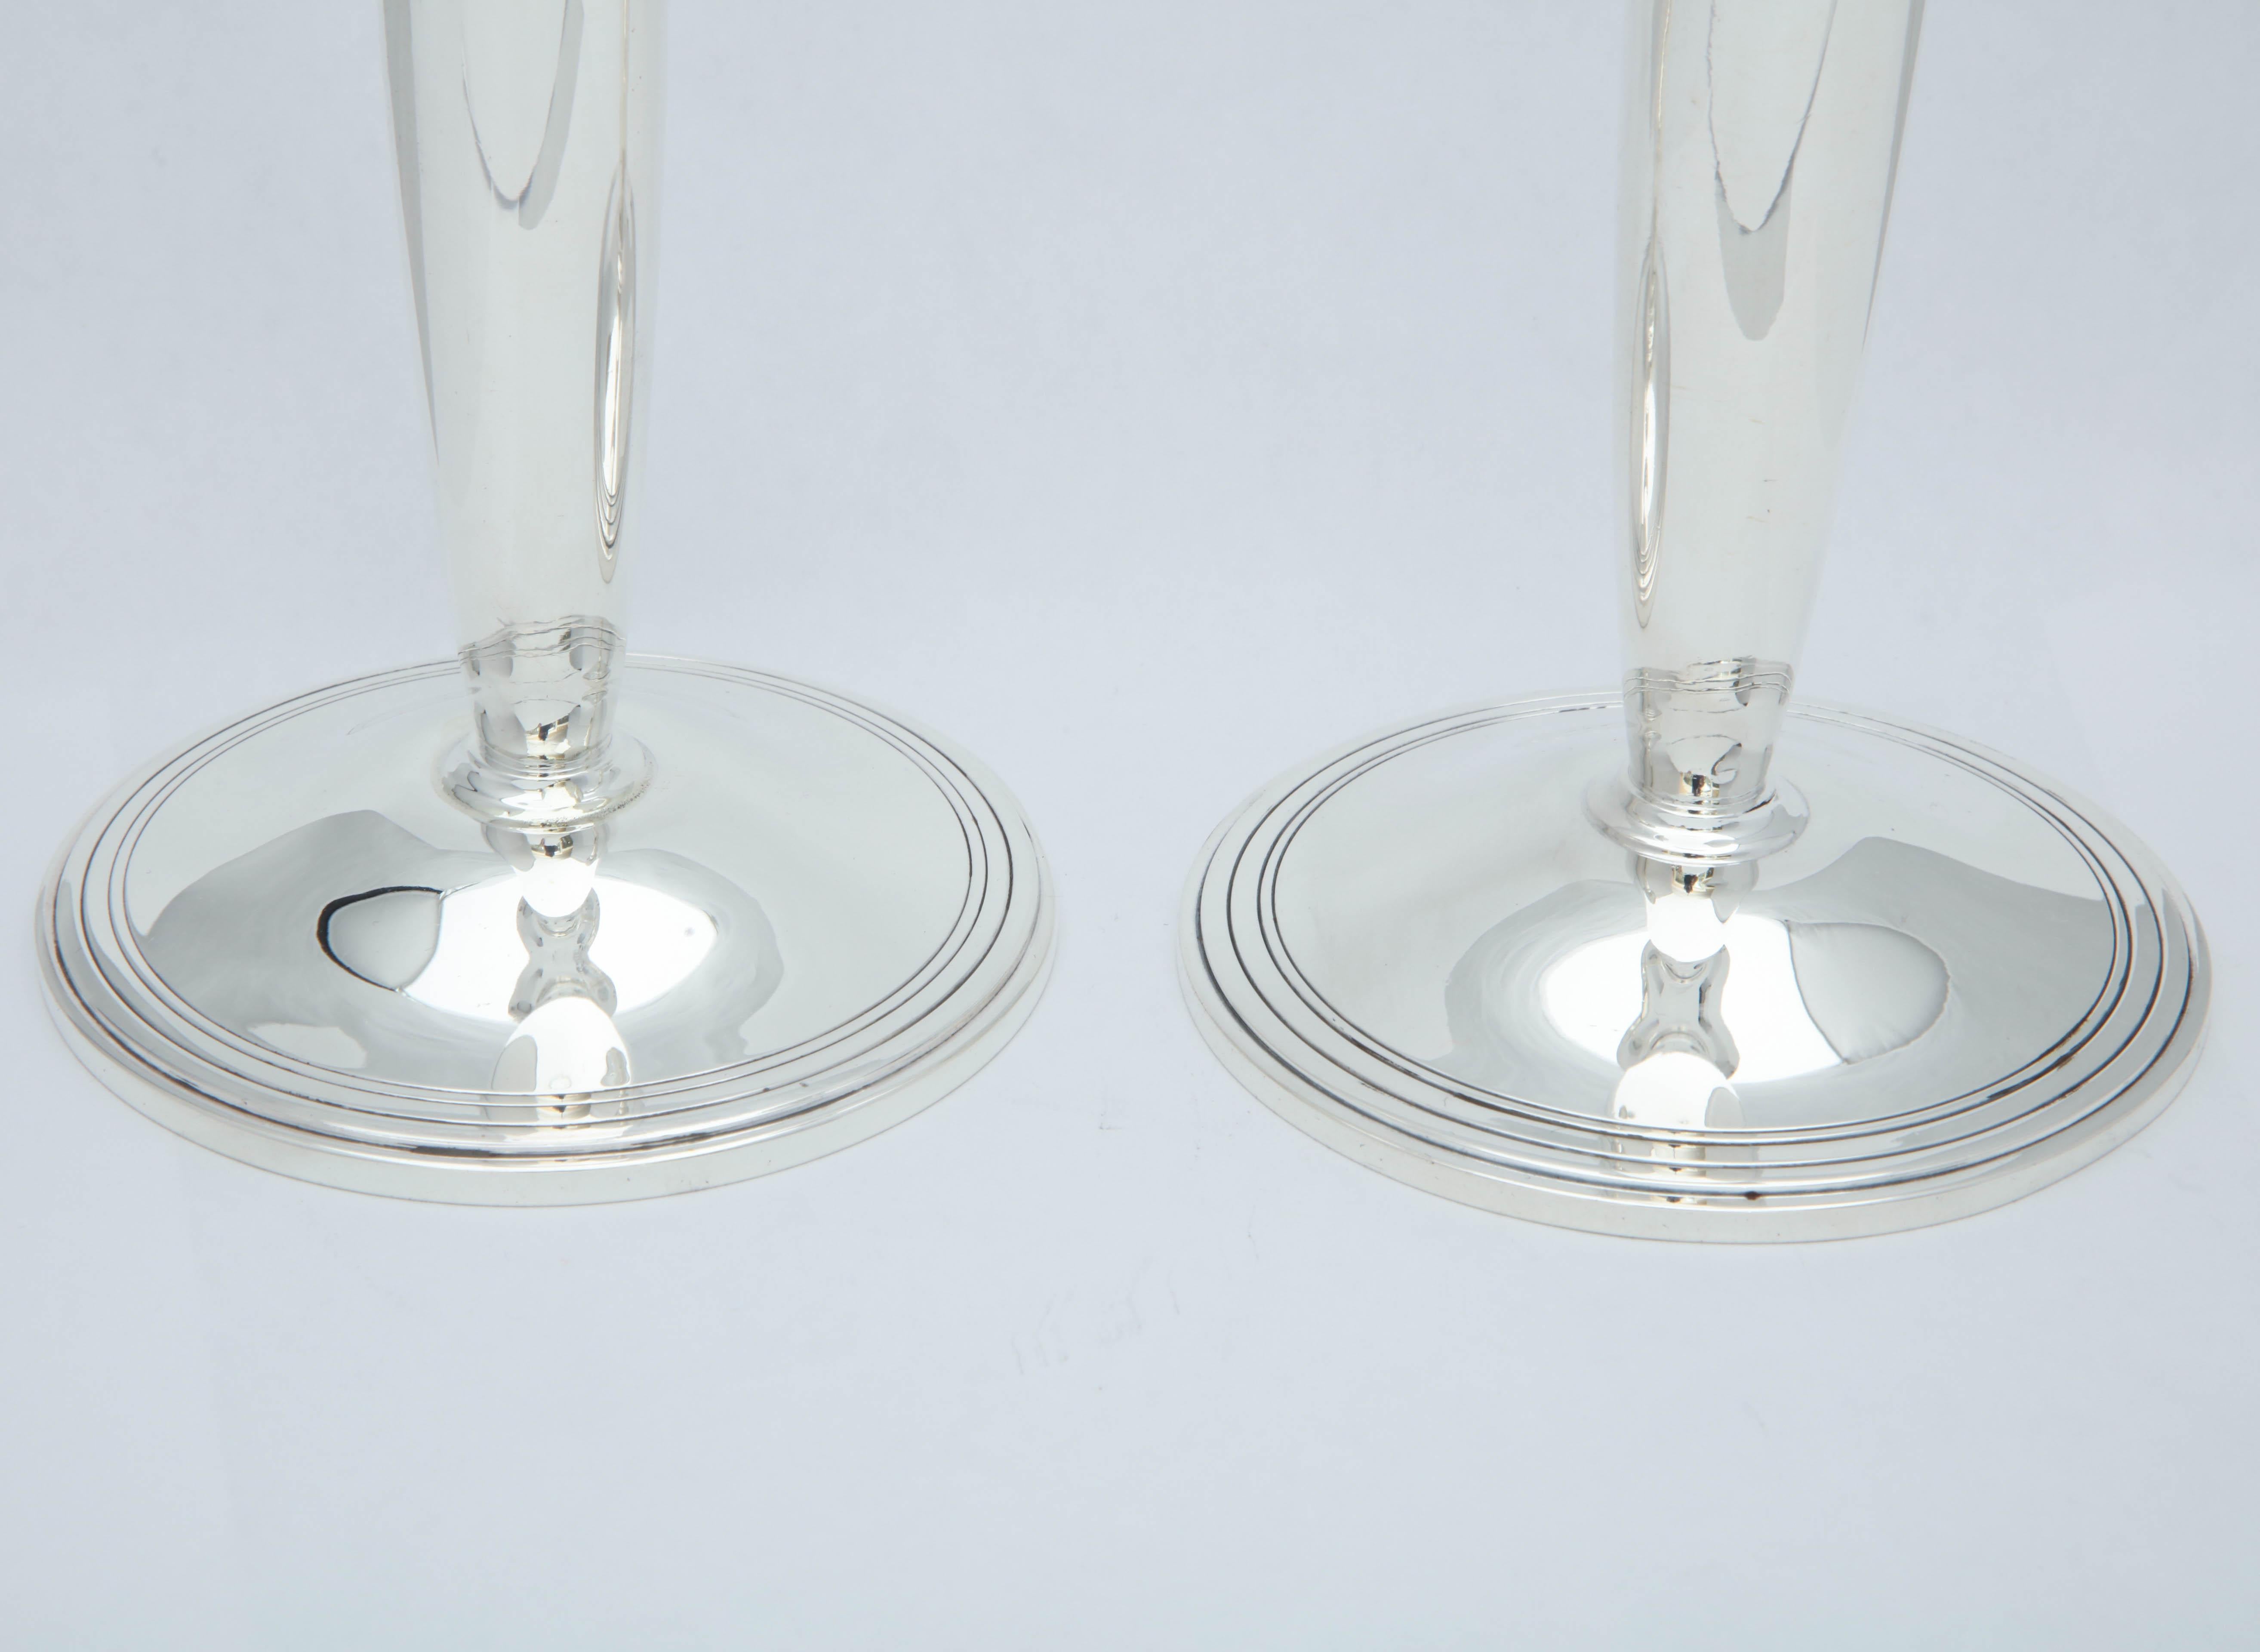 Pair of sterling silver, Mid-Century Modern candlesticks, Tiffany & Company, New York, year marked for 1949-1950. Each measures 7 3/4 inches high x 3 3/4 inches in diameter across base. Pair weighs 12.250 troy ounces. Dark spots in photos are